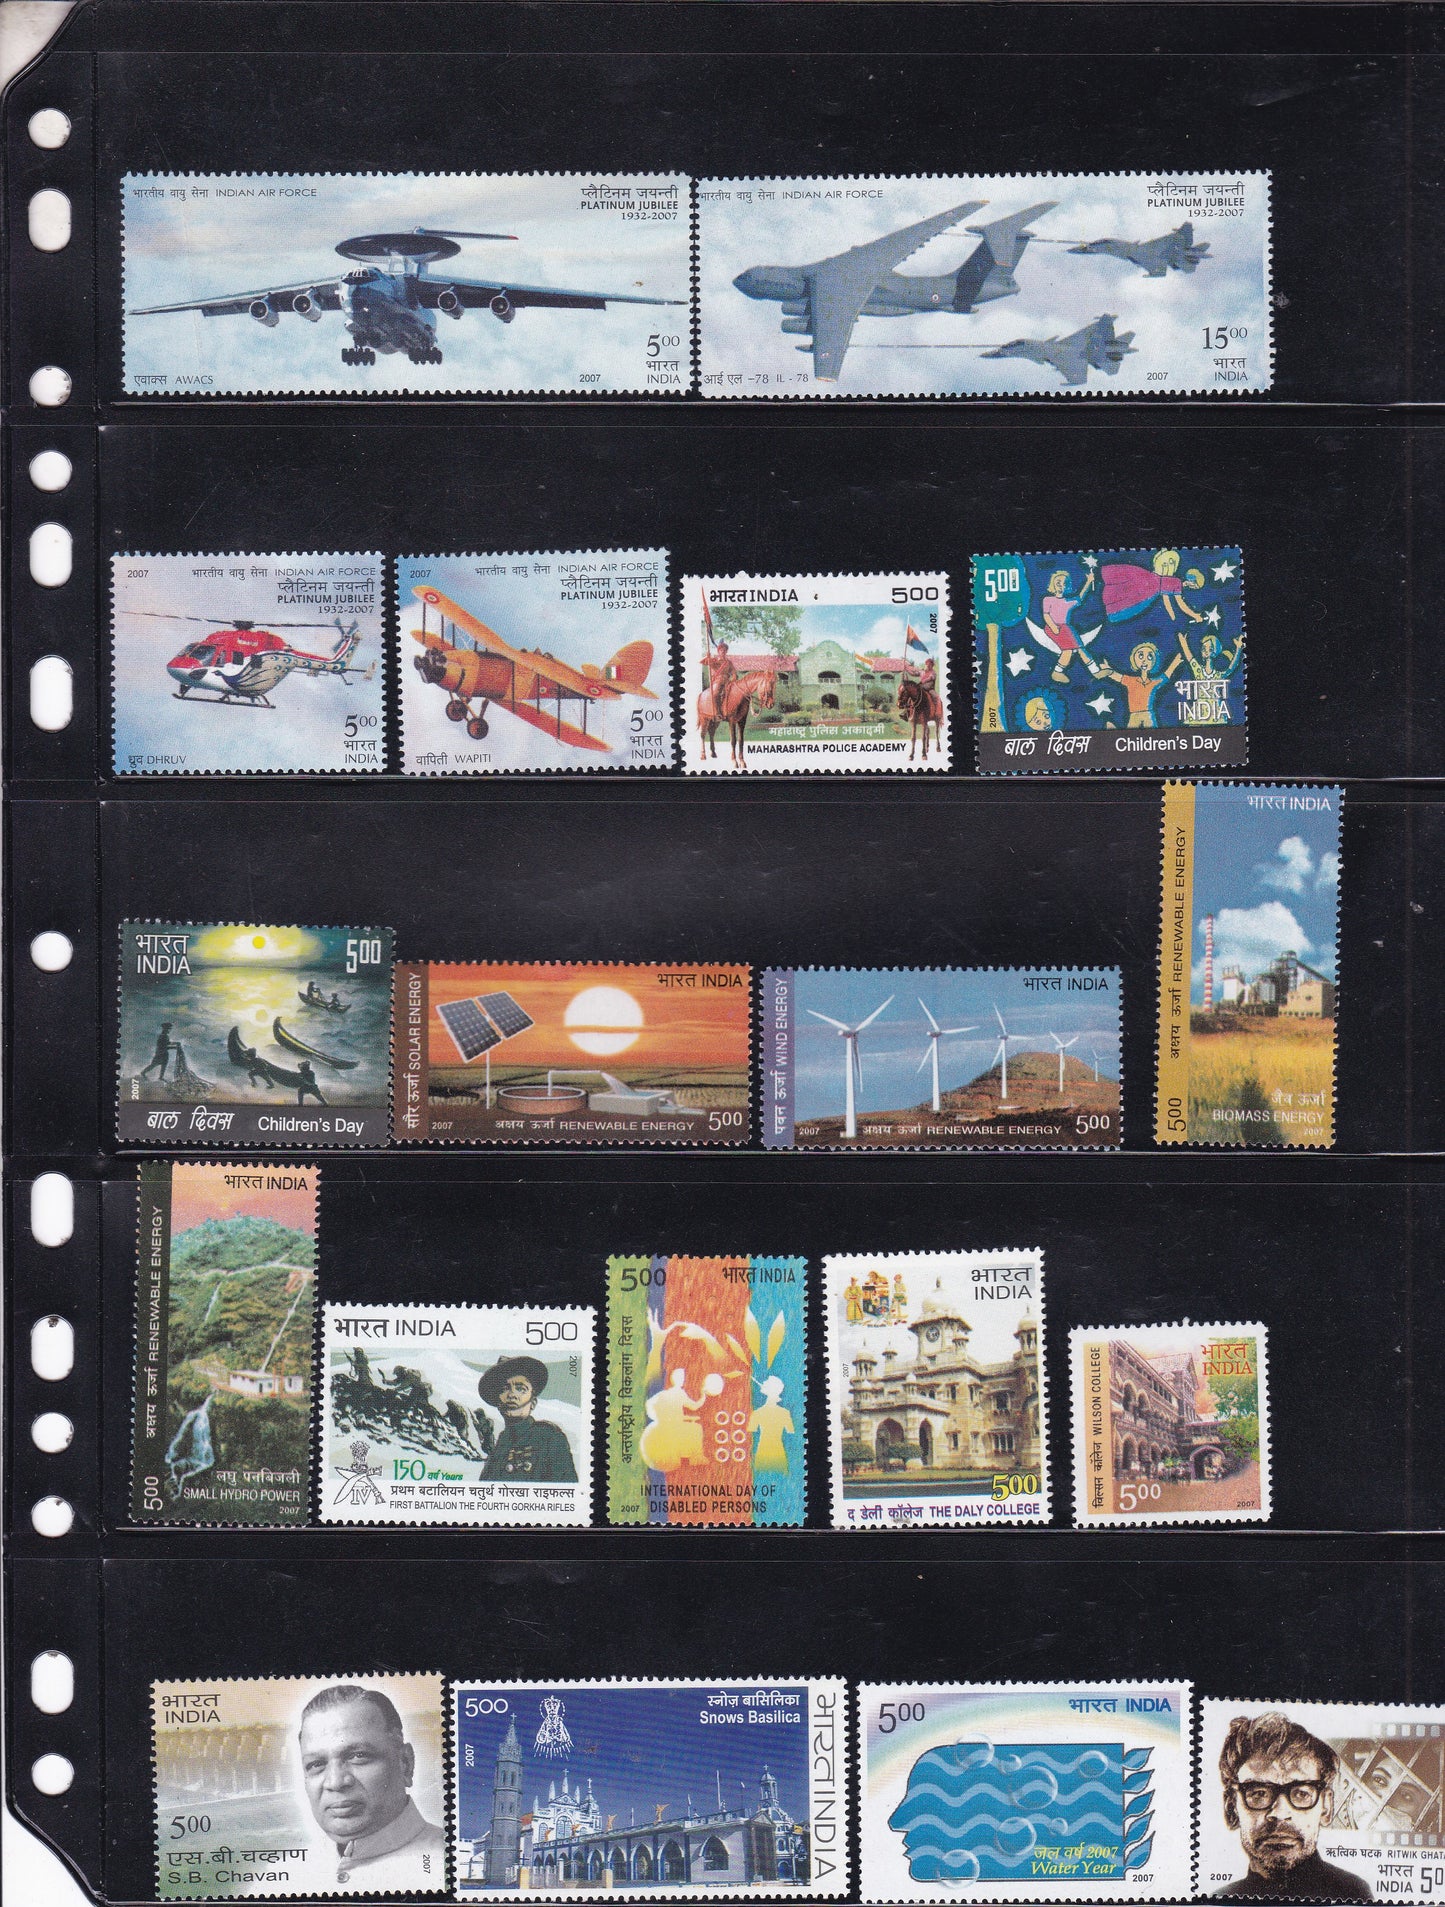 India-2008 Full Year pack MNH Stamps.